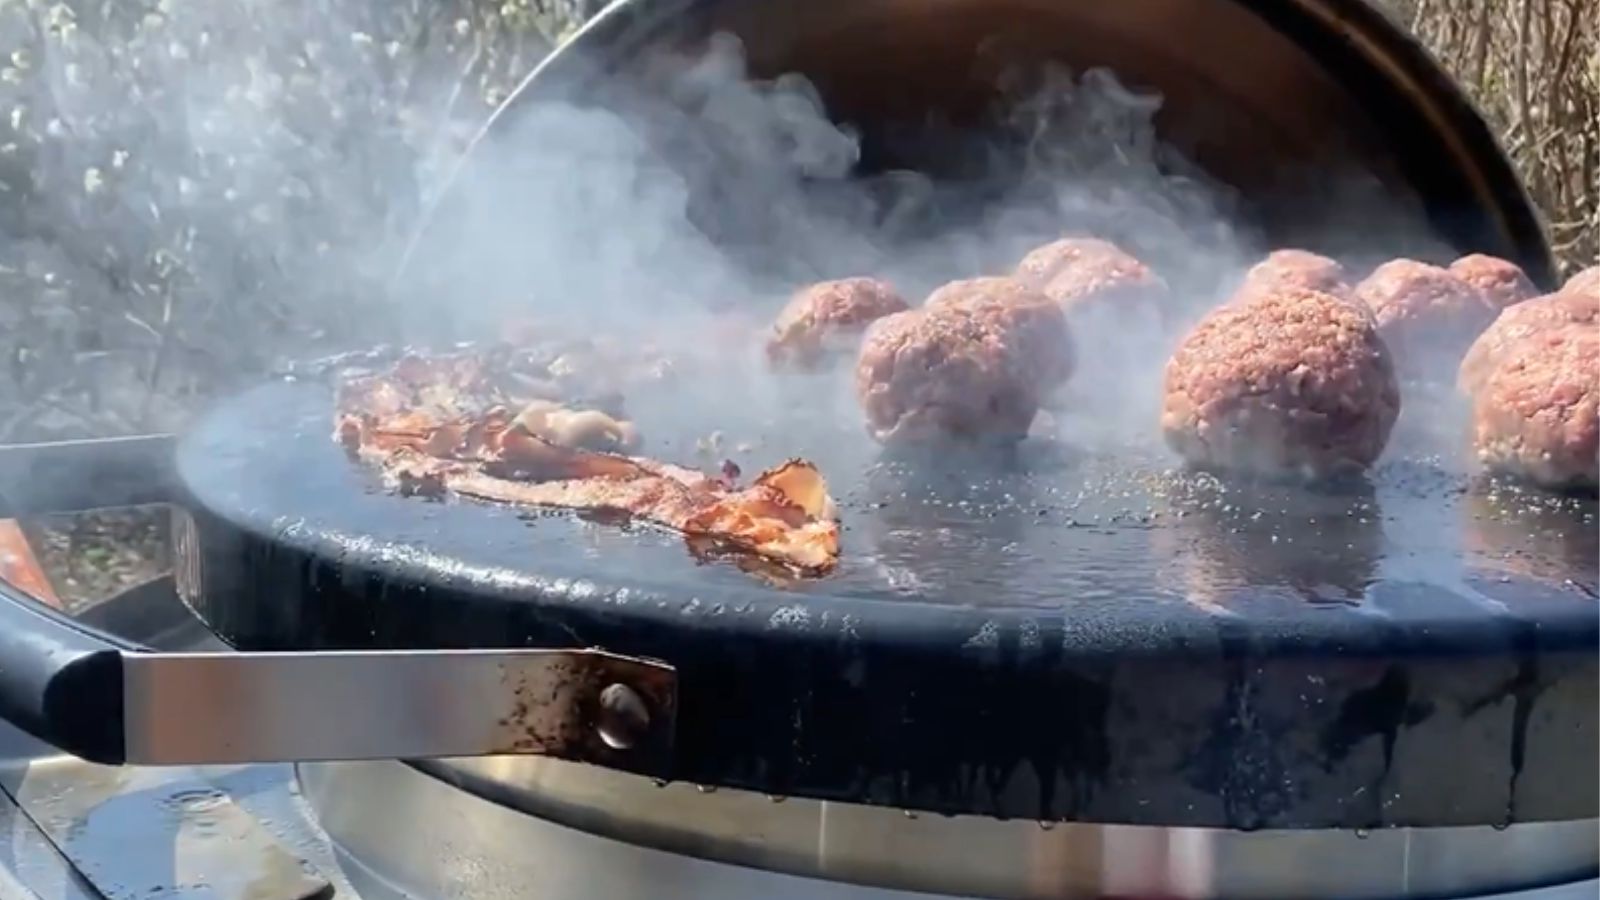 Close up photo of a mobile flattop commercial grill. The top of the grill is round and black. There are multiple strips of bacon, and a bunch a very large meatballs cooking on top of the grill. Steam is rising up from the sizzling meatballs and bacon.